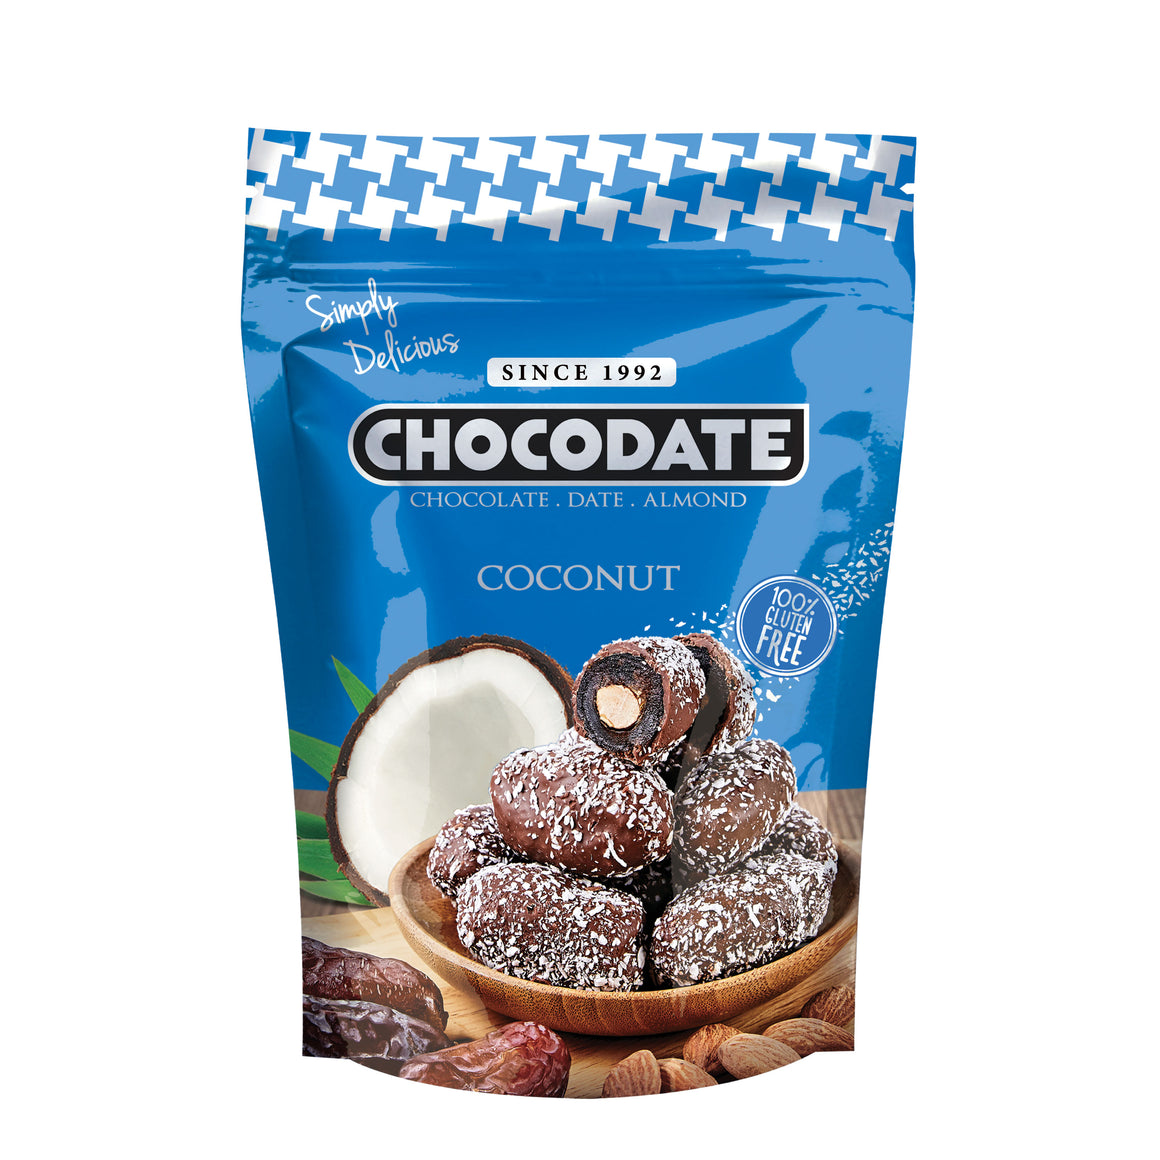 Chocodate Coconut  | Exquisite Bite Sized Delicacy | Handmade Treat - Rich Silky Chocolate - Velvety Arabian Date - Golden Roasted Almond - 250gms